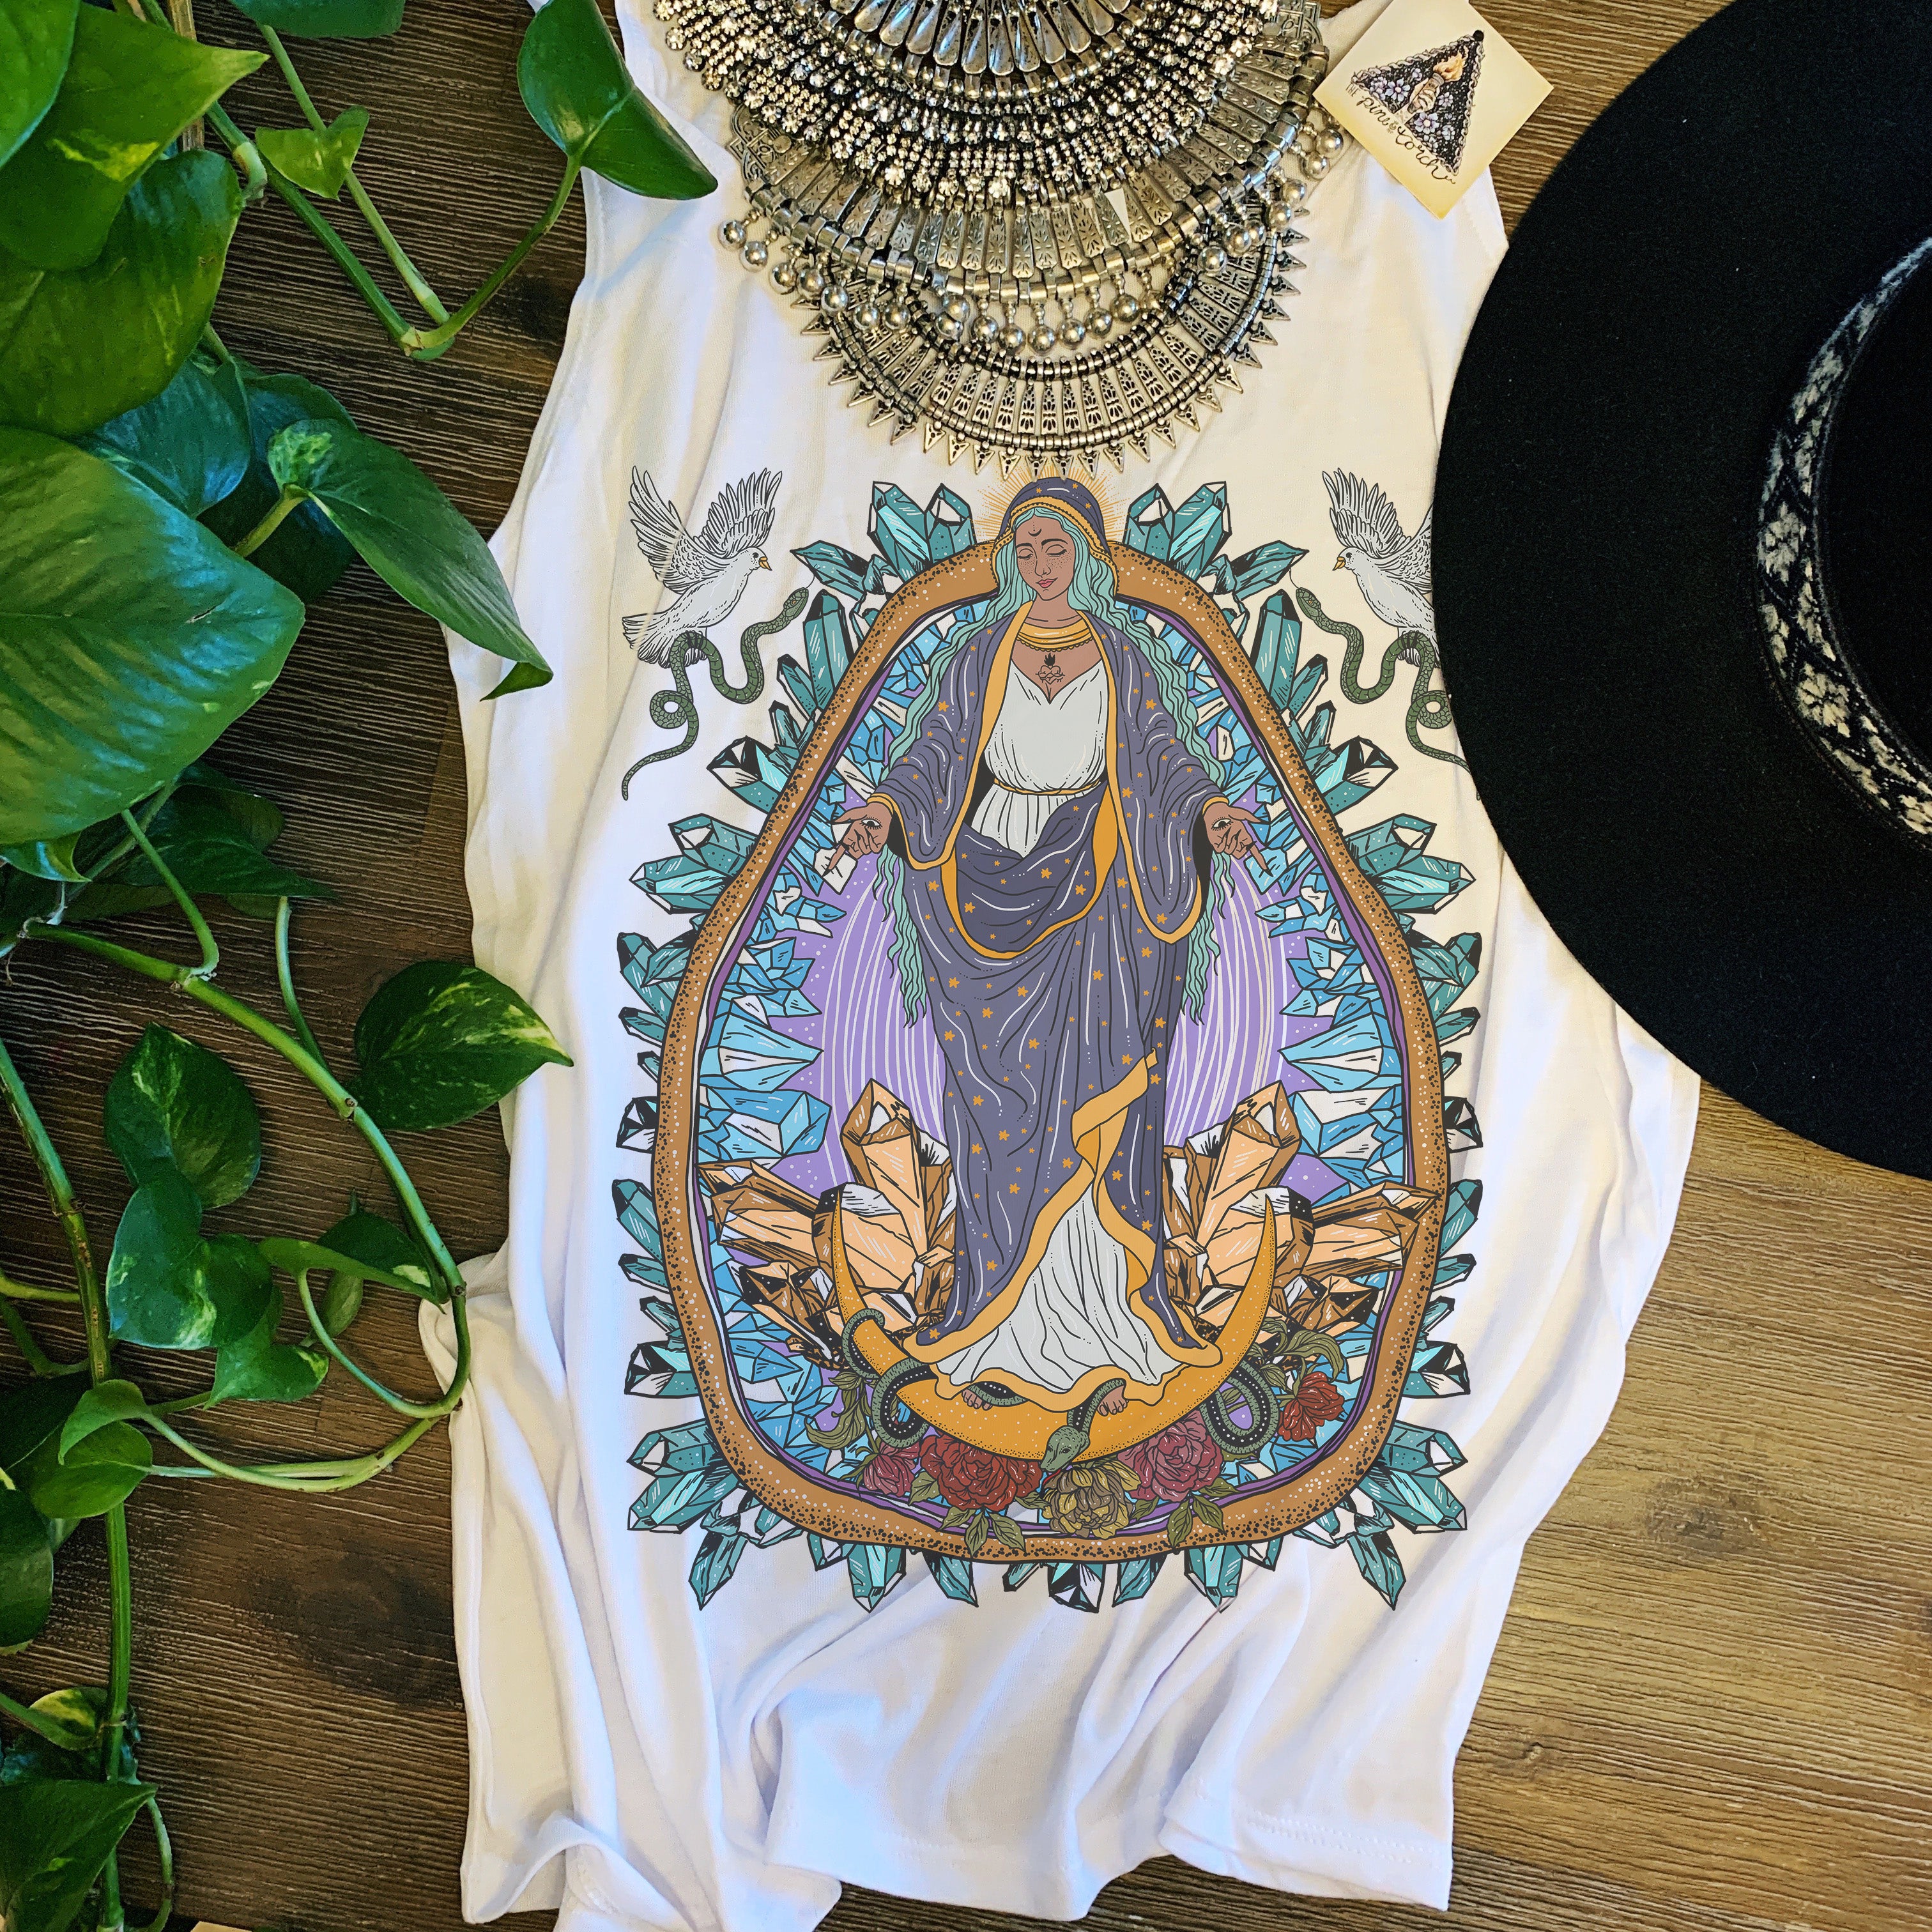 « VIRGIN MARY / GUADALUPE WITH CRYSTALS » SLOUCHY OR RACERBACK TANK